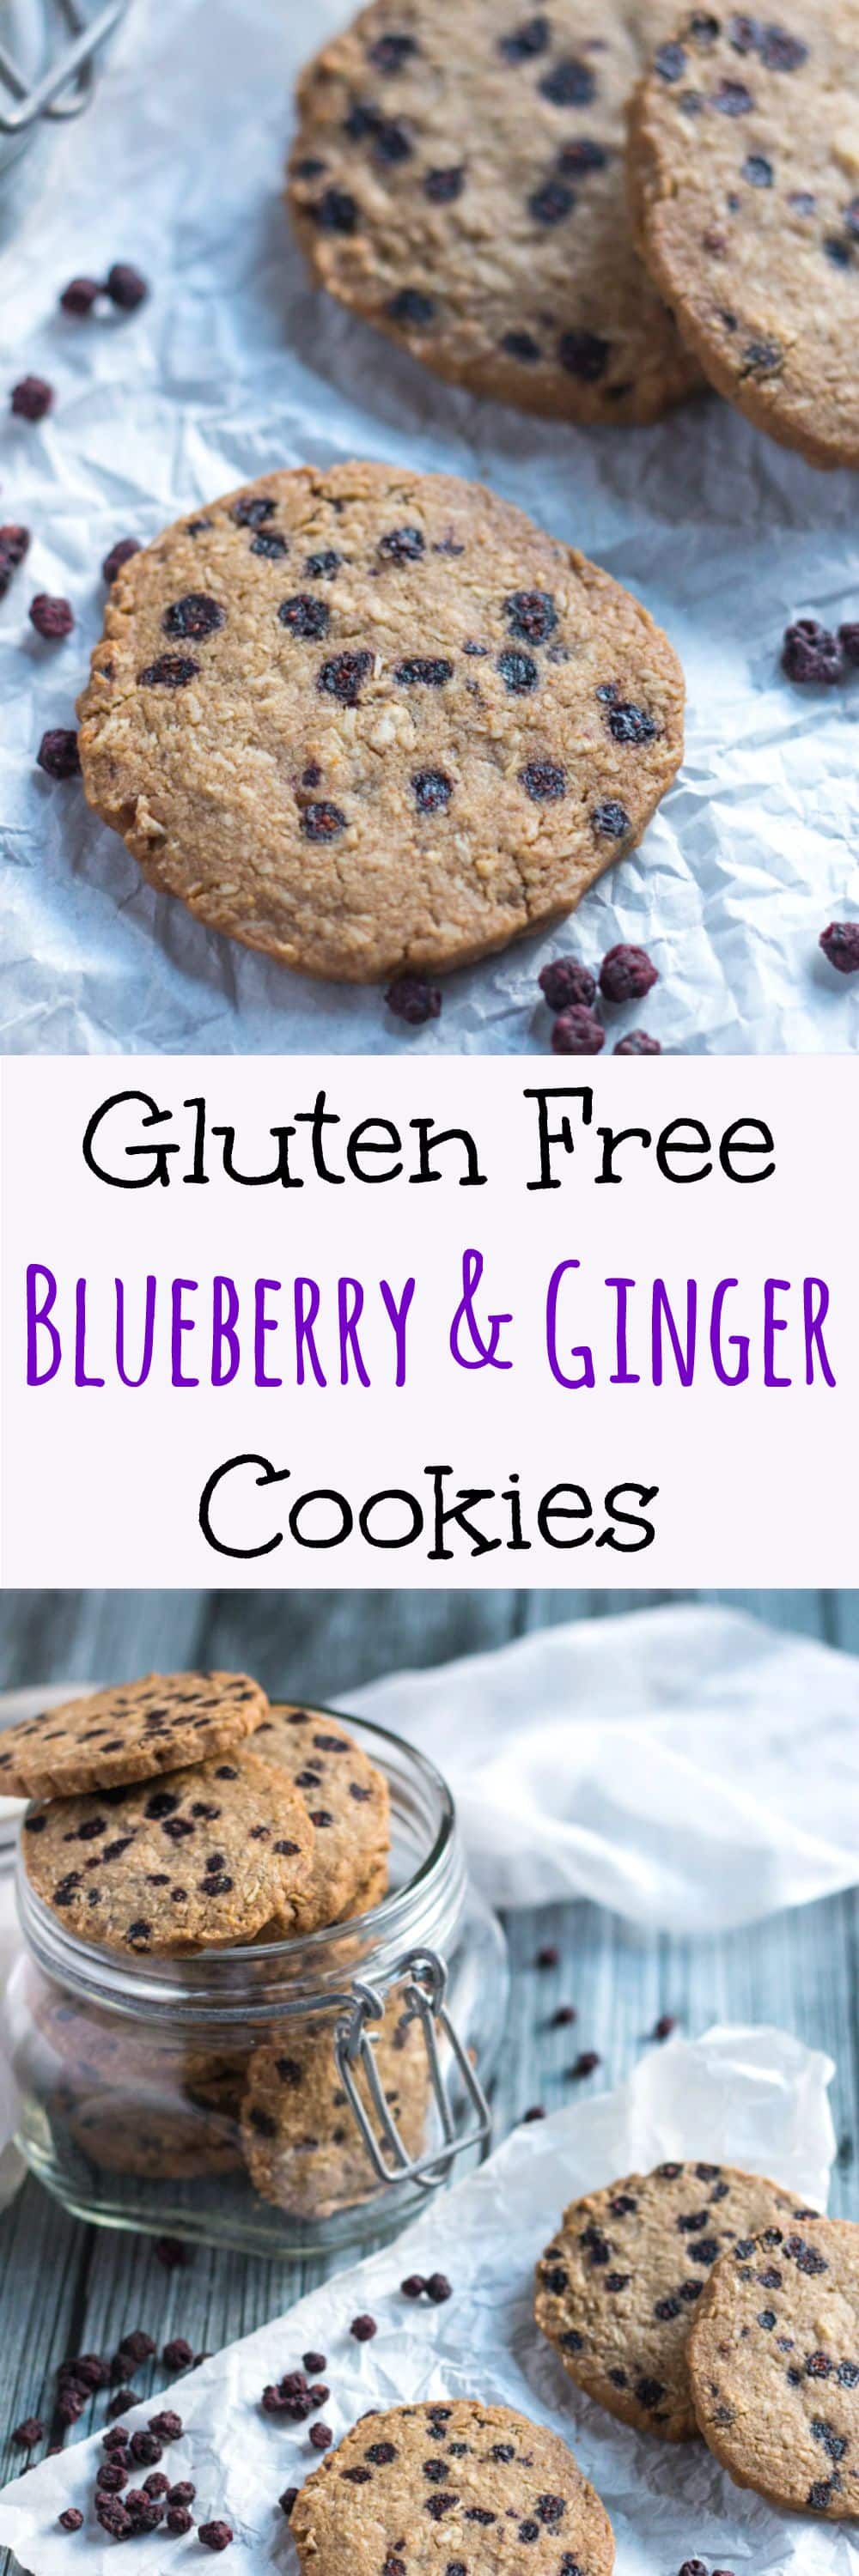 Gluten Free Blueberry & Ginger Cookies. Not your average gluten free cookie.